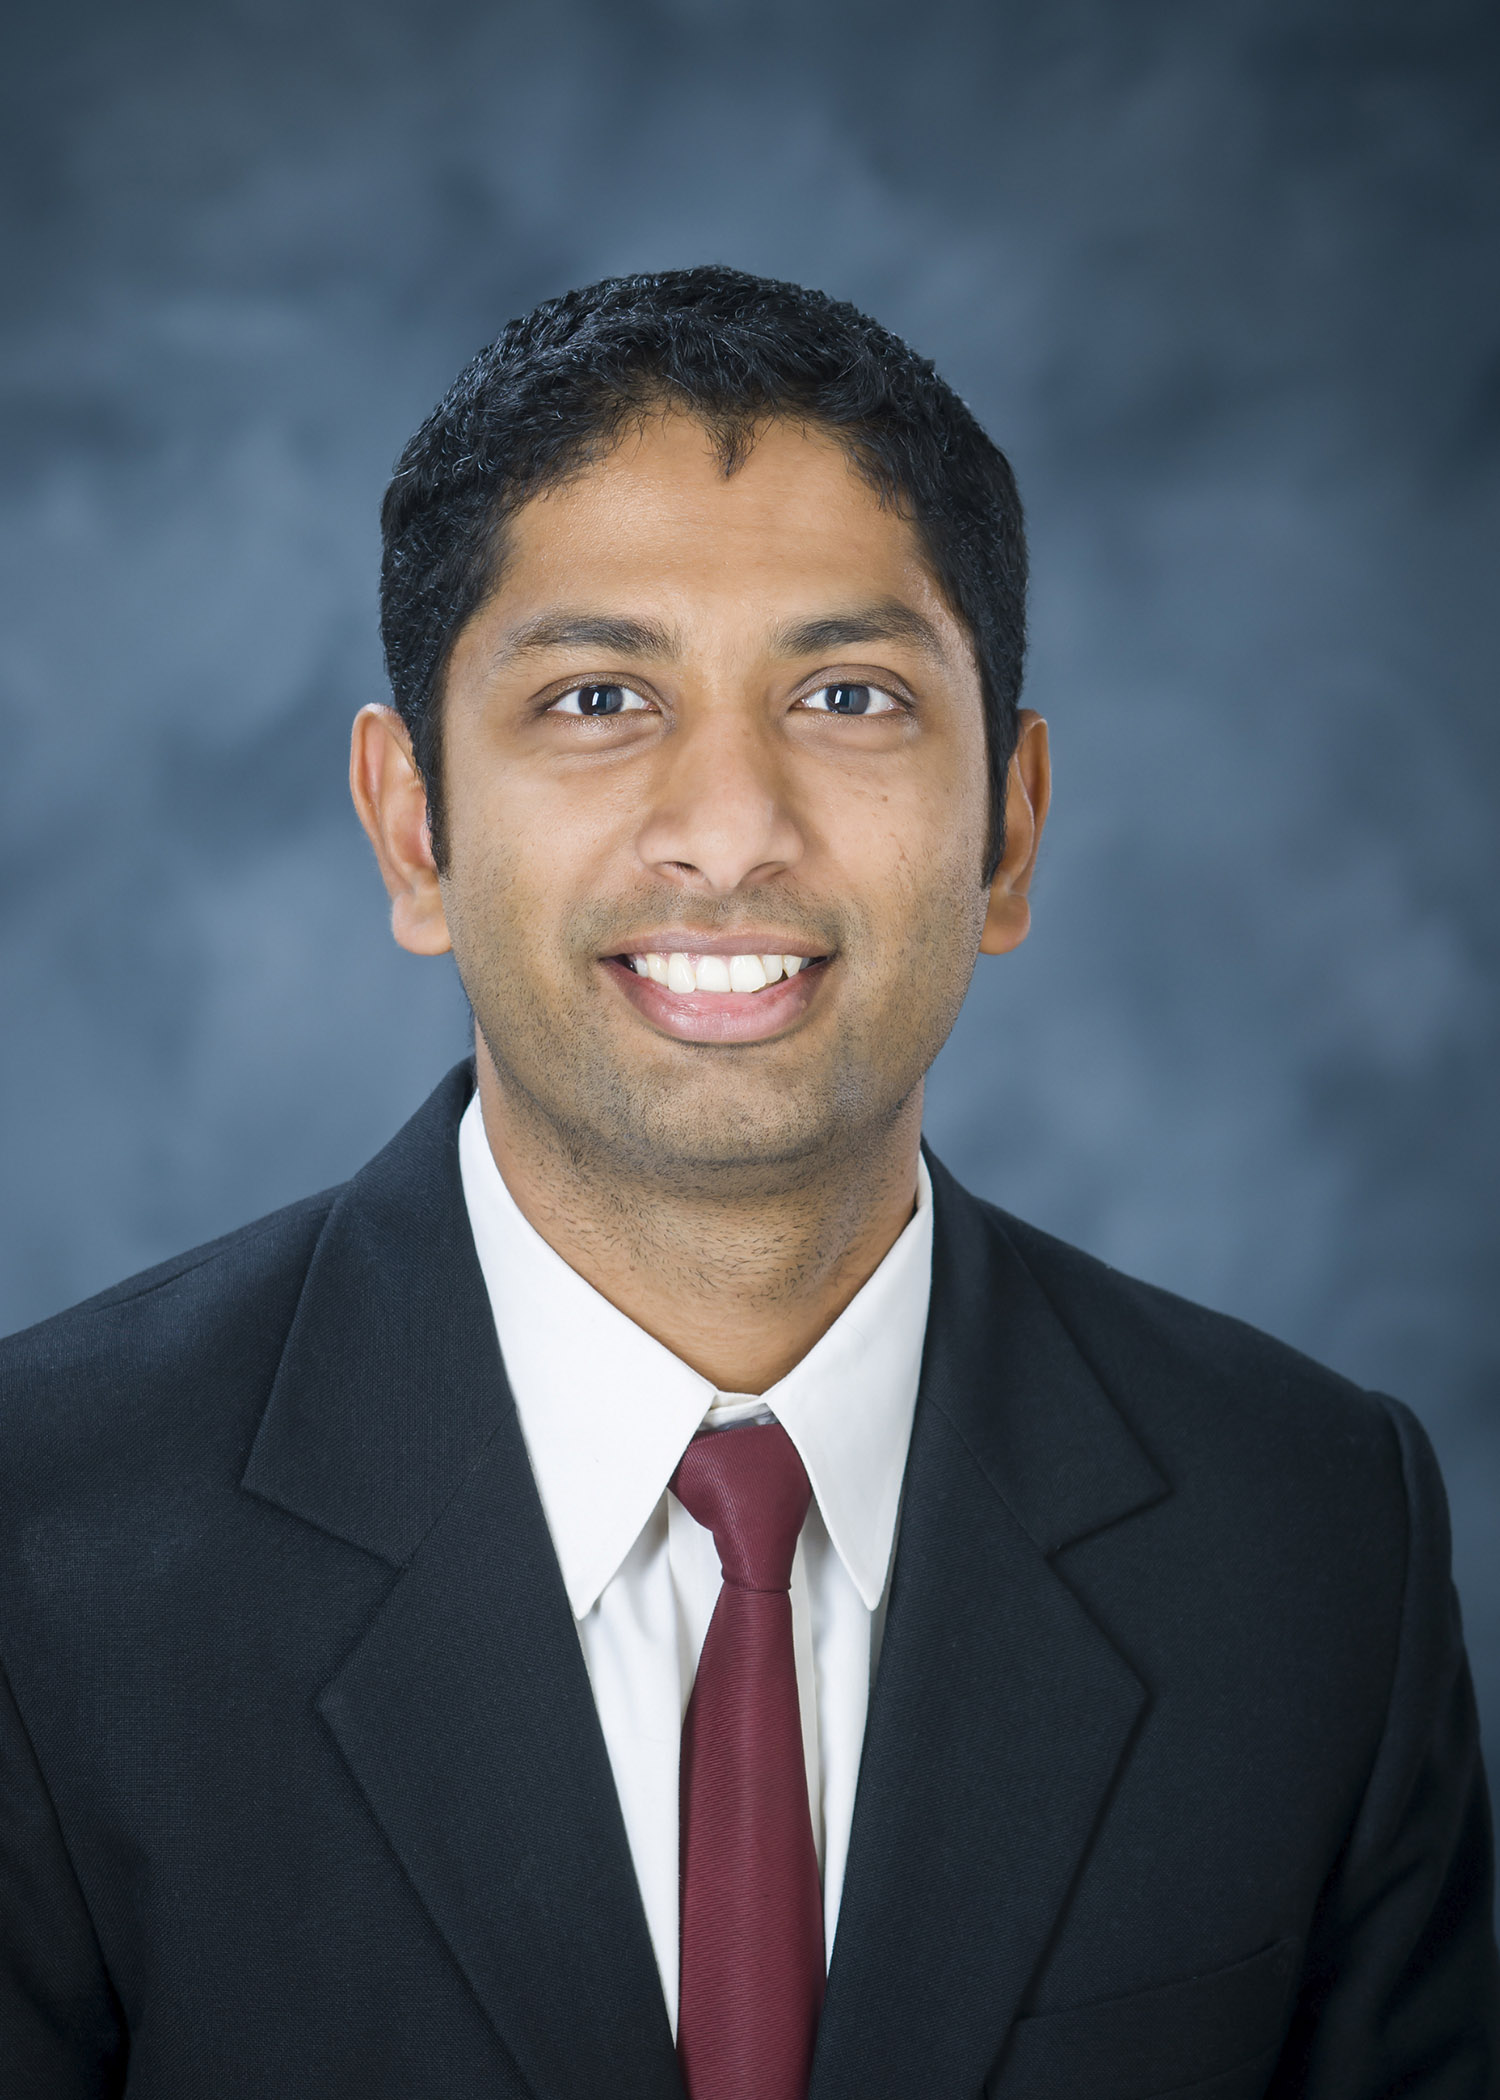 Professional photo of Varun Paul, wearing a black suit and red tie against a blue background.